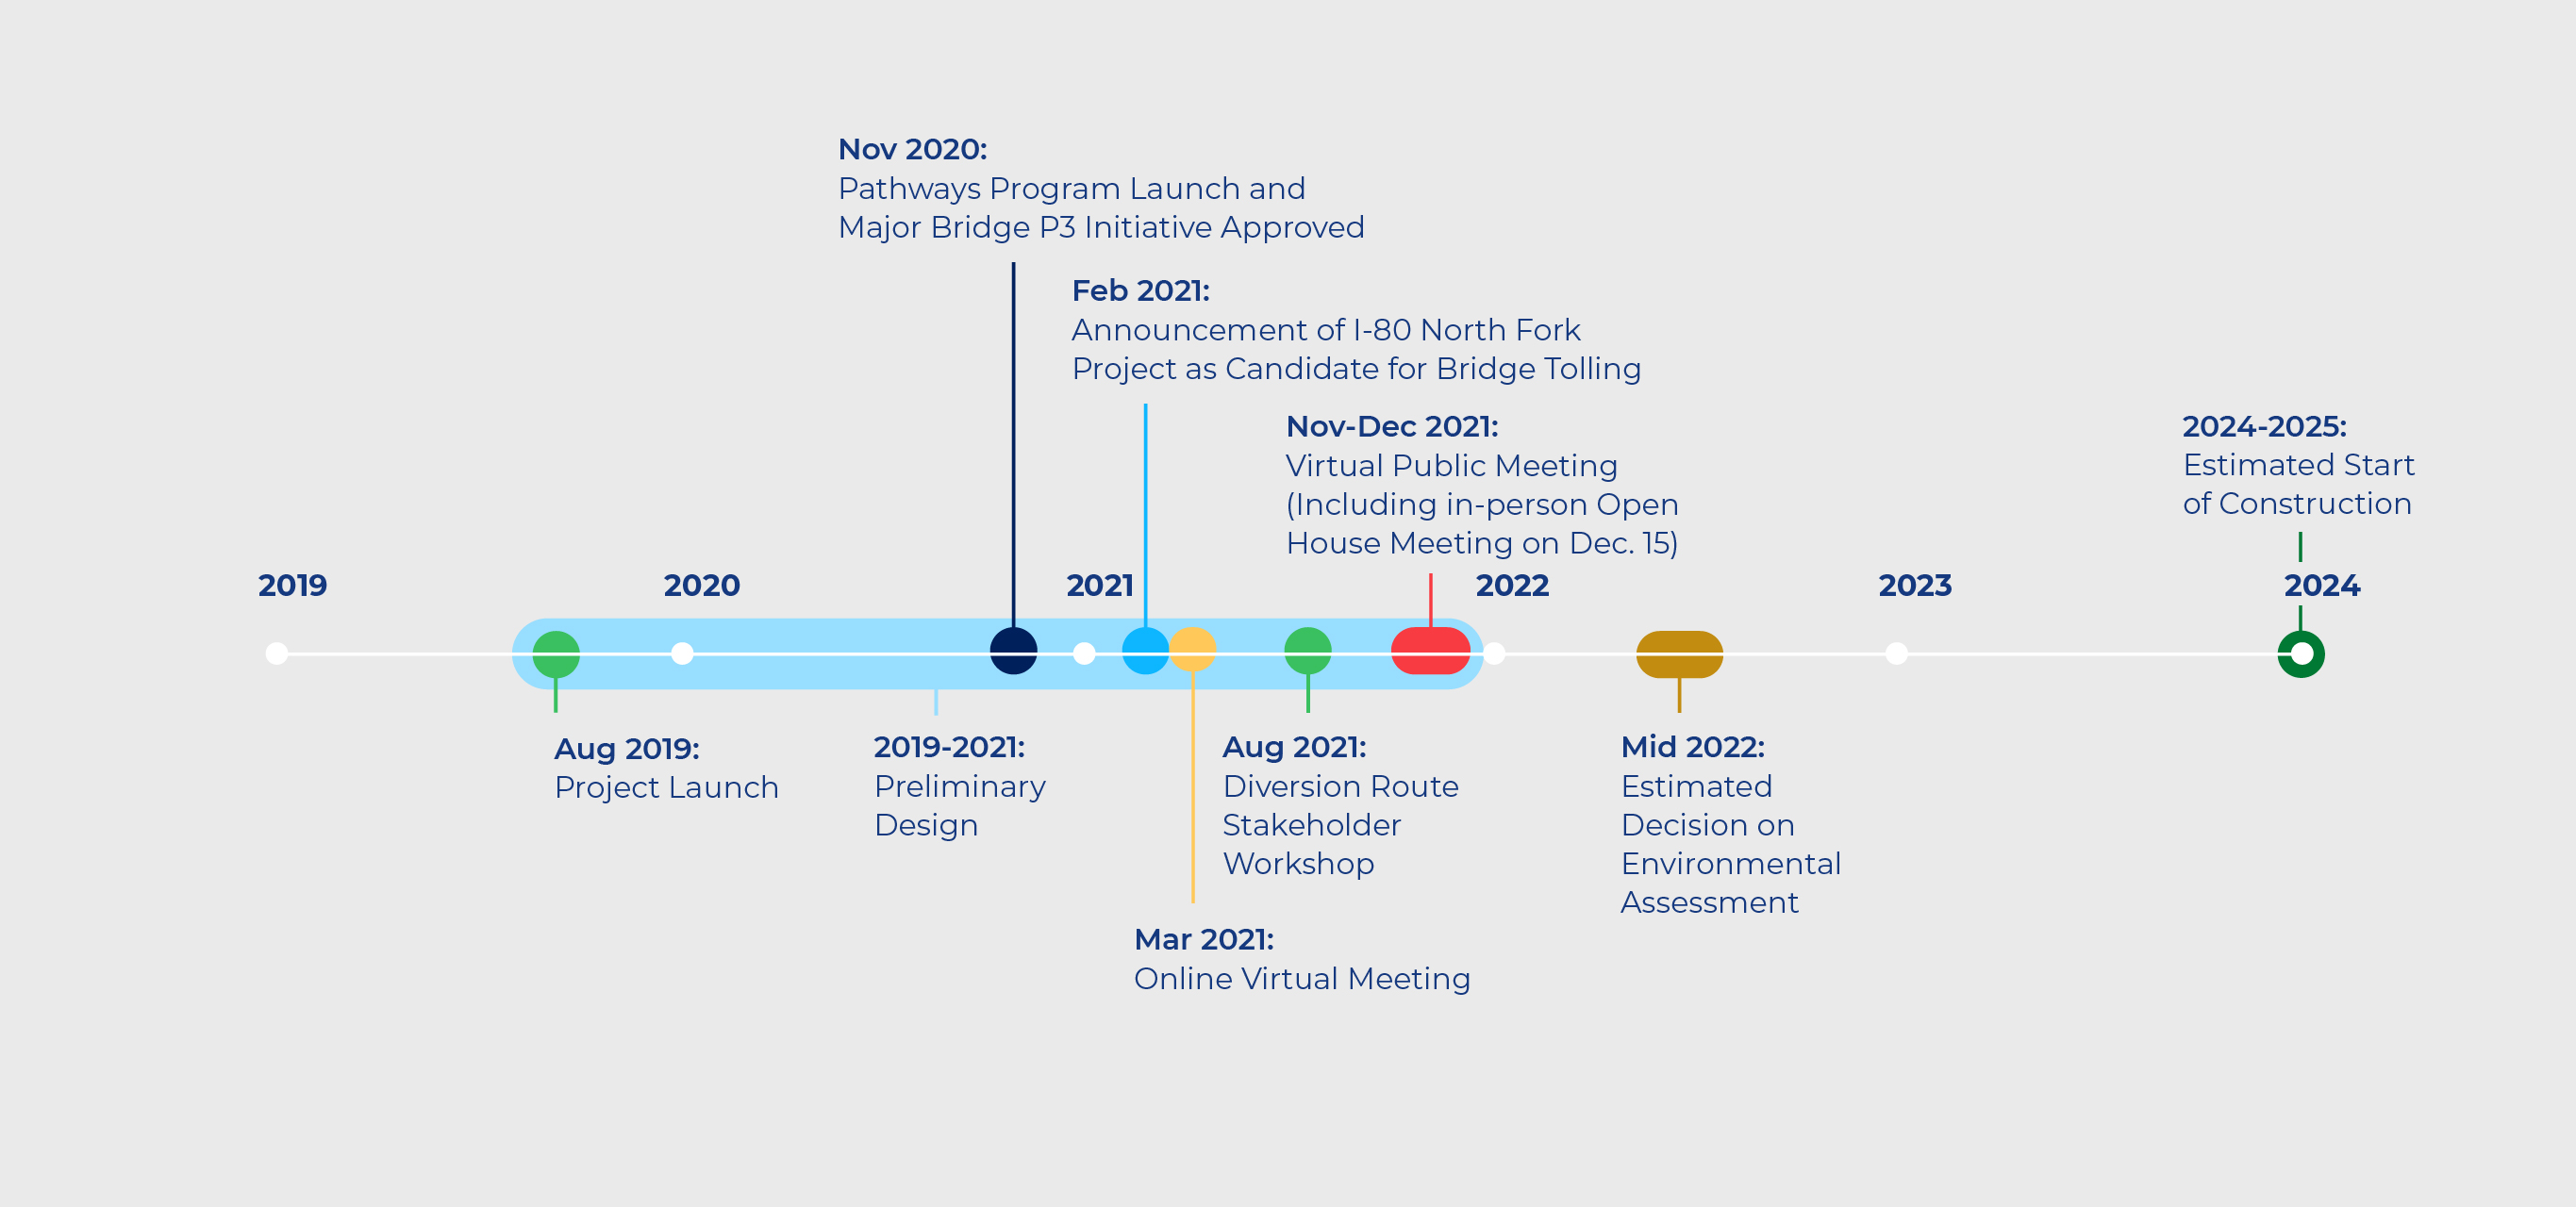 Timeline: Project launch in August 2019. Preliminary design in 2019-2021. Pathways Program launches and Major Bridge P3 initiative approved in November 2020. Announcement of I-80 North Fork Project as candidate for bridge tolling in Feburary 2021. Online virtual meeting in March 2021. Diversion route stakeholder workshop in August 2021. Virtual public meeting (including in-person open huse meeting on Dec. 15) in November-December 2021. Estimated decision on Environmental Assessment in mid-2022. Estimated start of construction in 2024-2025.